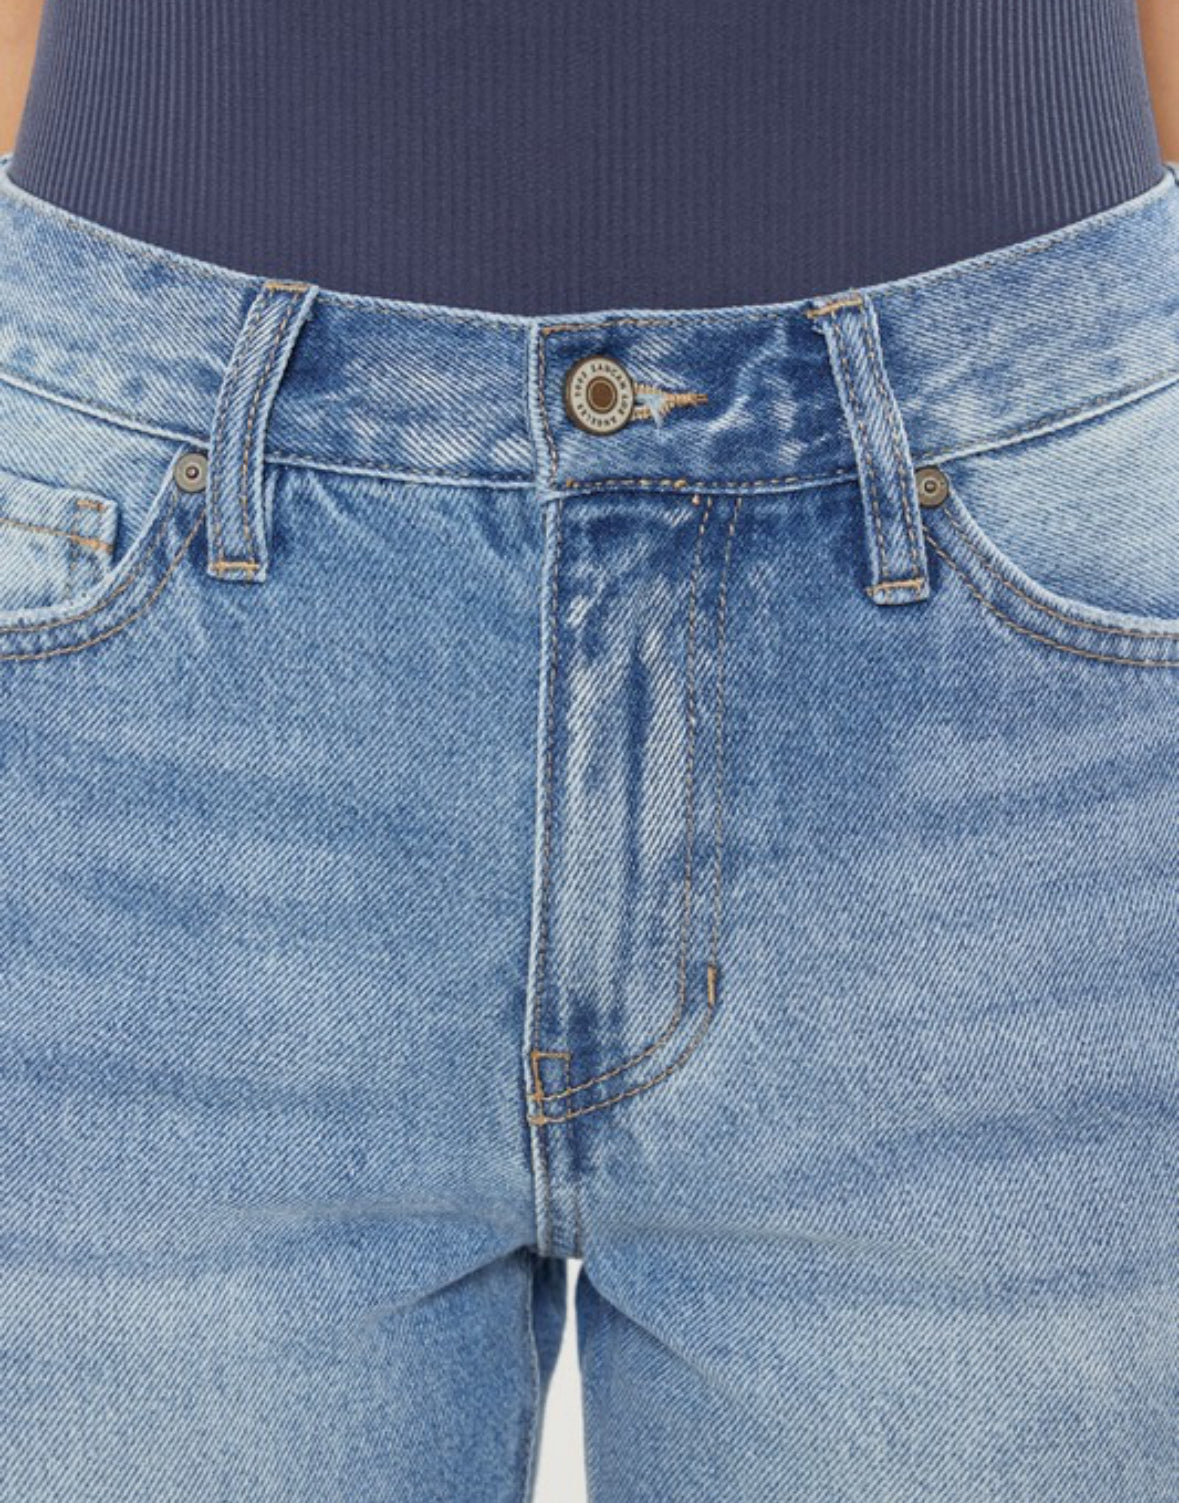 Kancan - HIGH RISE CHEWED UP MOM JEAN